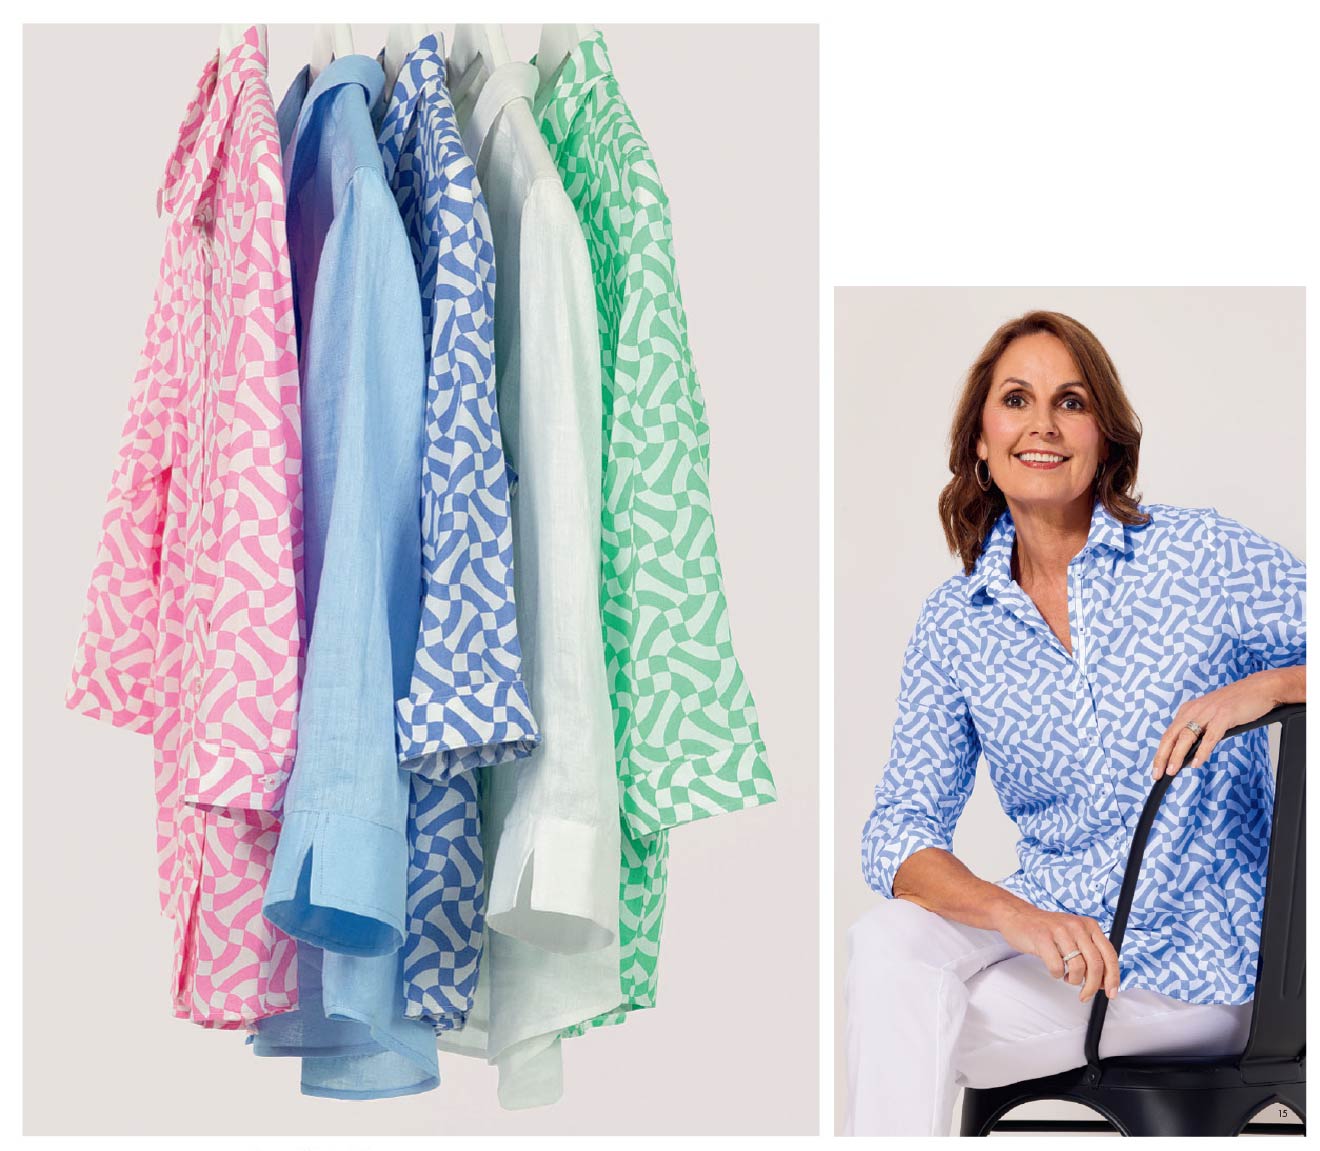 Catalogue image of Minnie and Caledonia shirt in blue pink and white